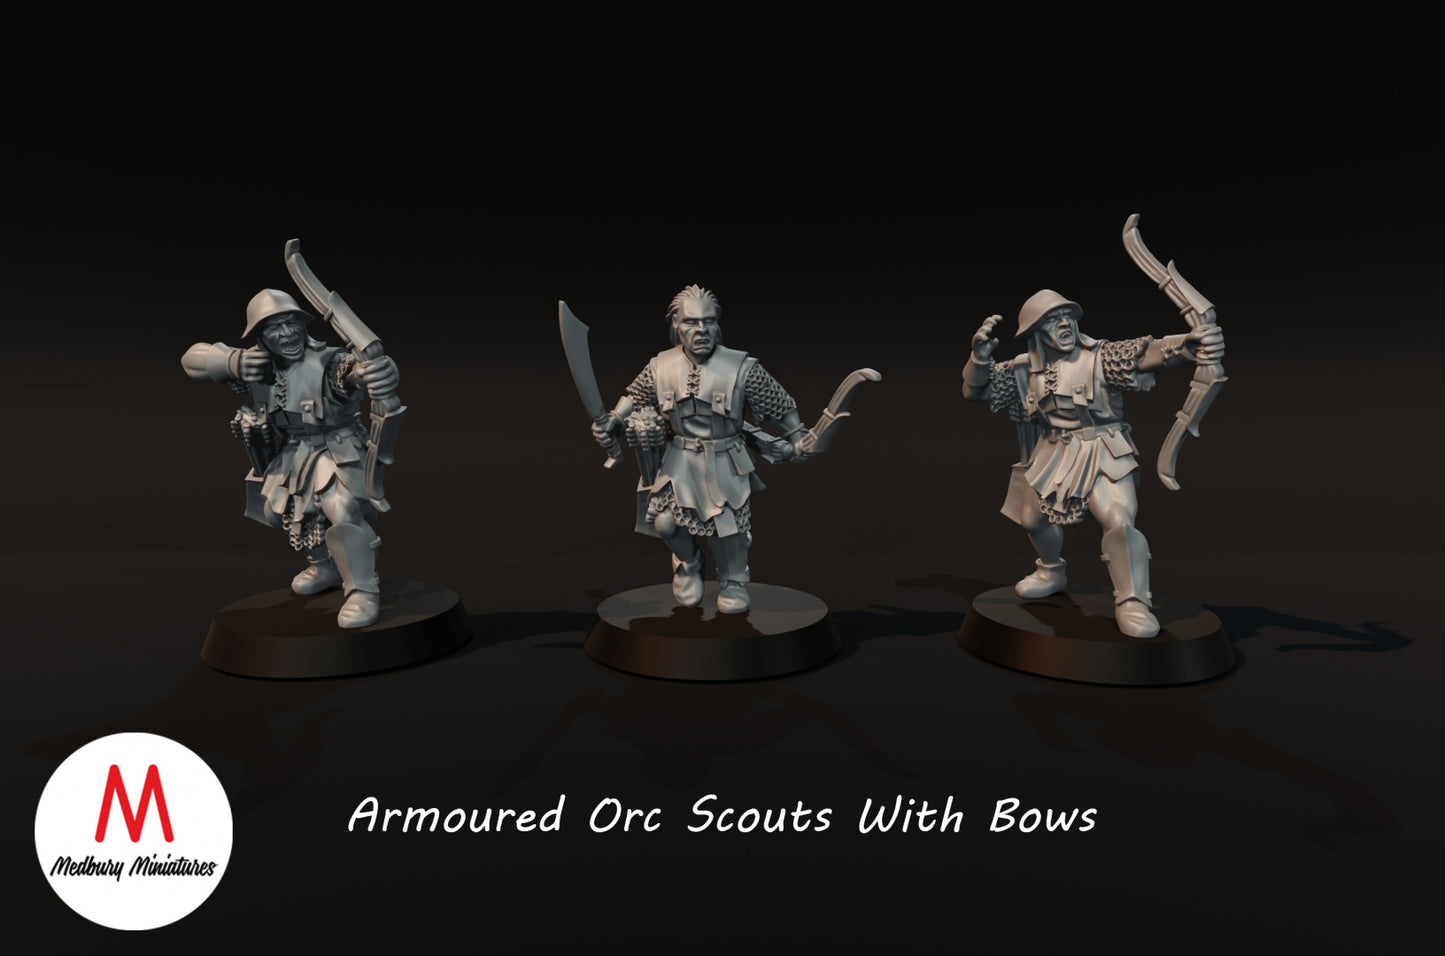 Armoured Orc Scouts with Bows